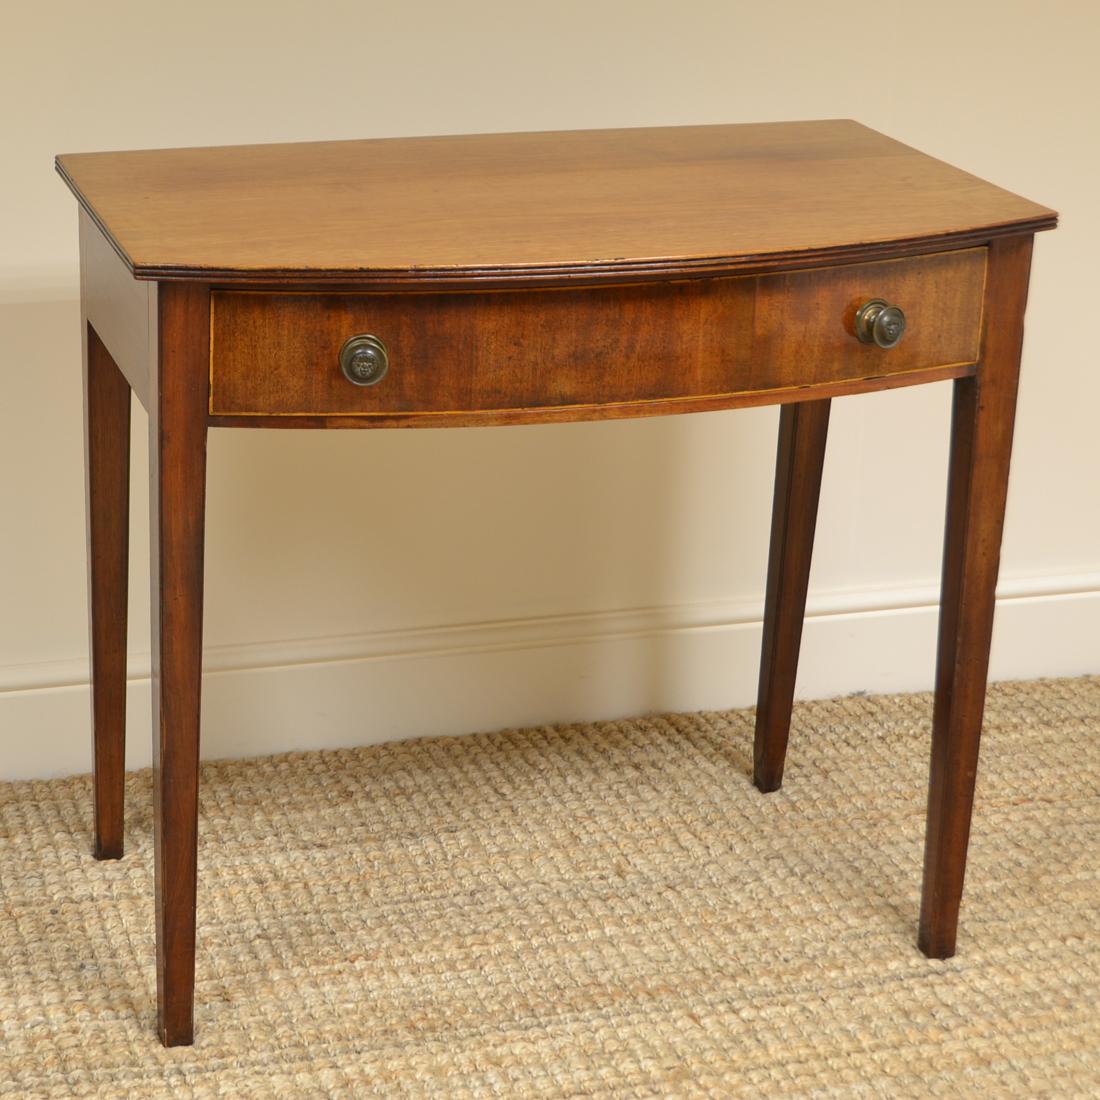 Country House Regency bow fronted antique side table
This fine Country House Regency mahogany bow fronted antique side table dates from circa 1830 and is full of beautiful charm and character. It has a beautifully figured top above a frieze drawer